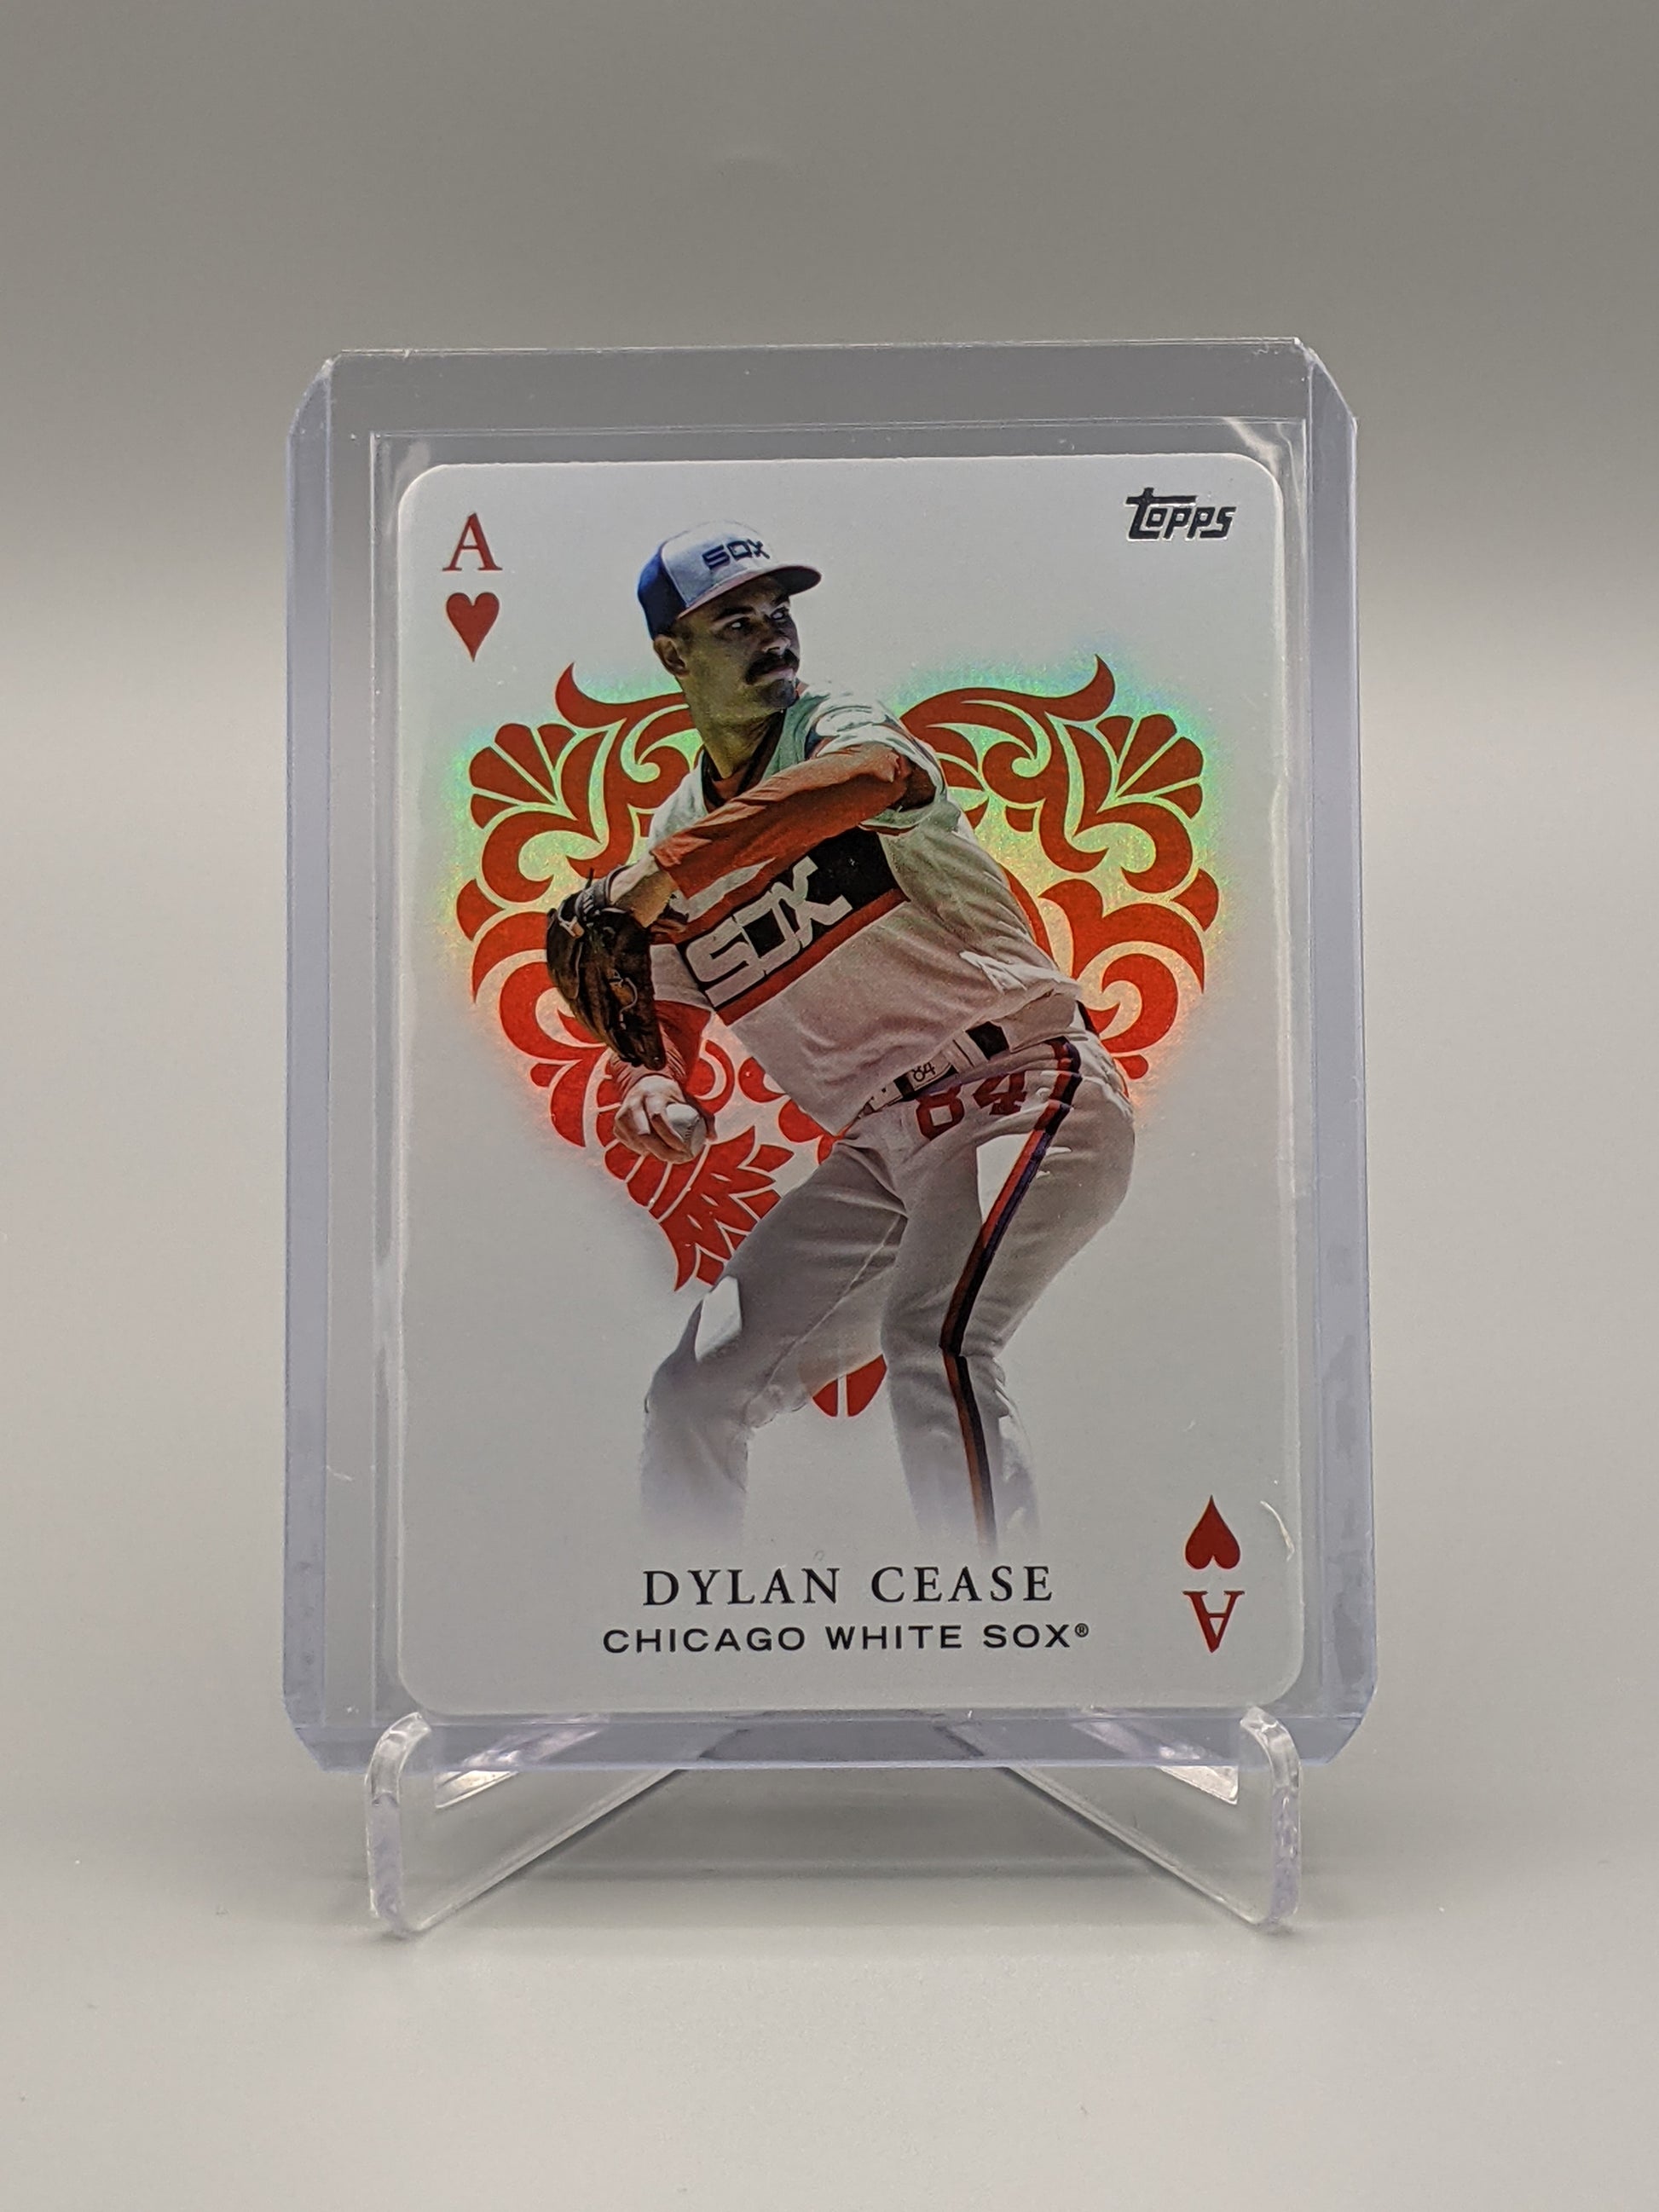 2020 Donruss Dylan Cease Signature Series #22 Chicago White Sox